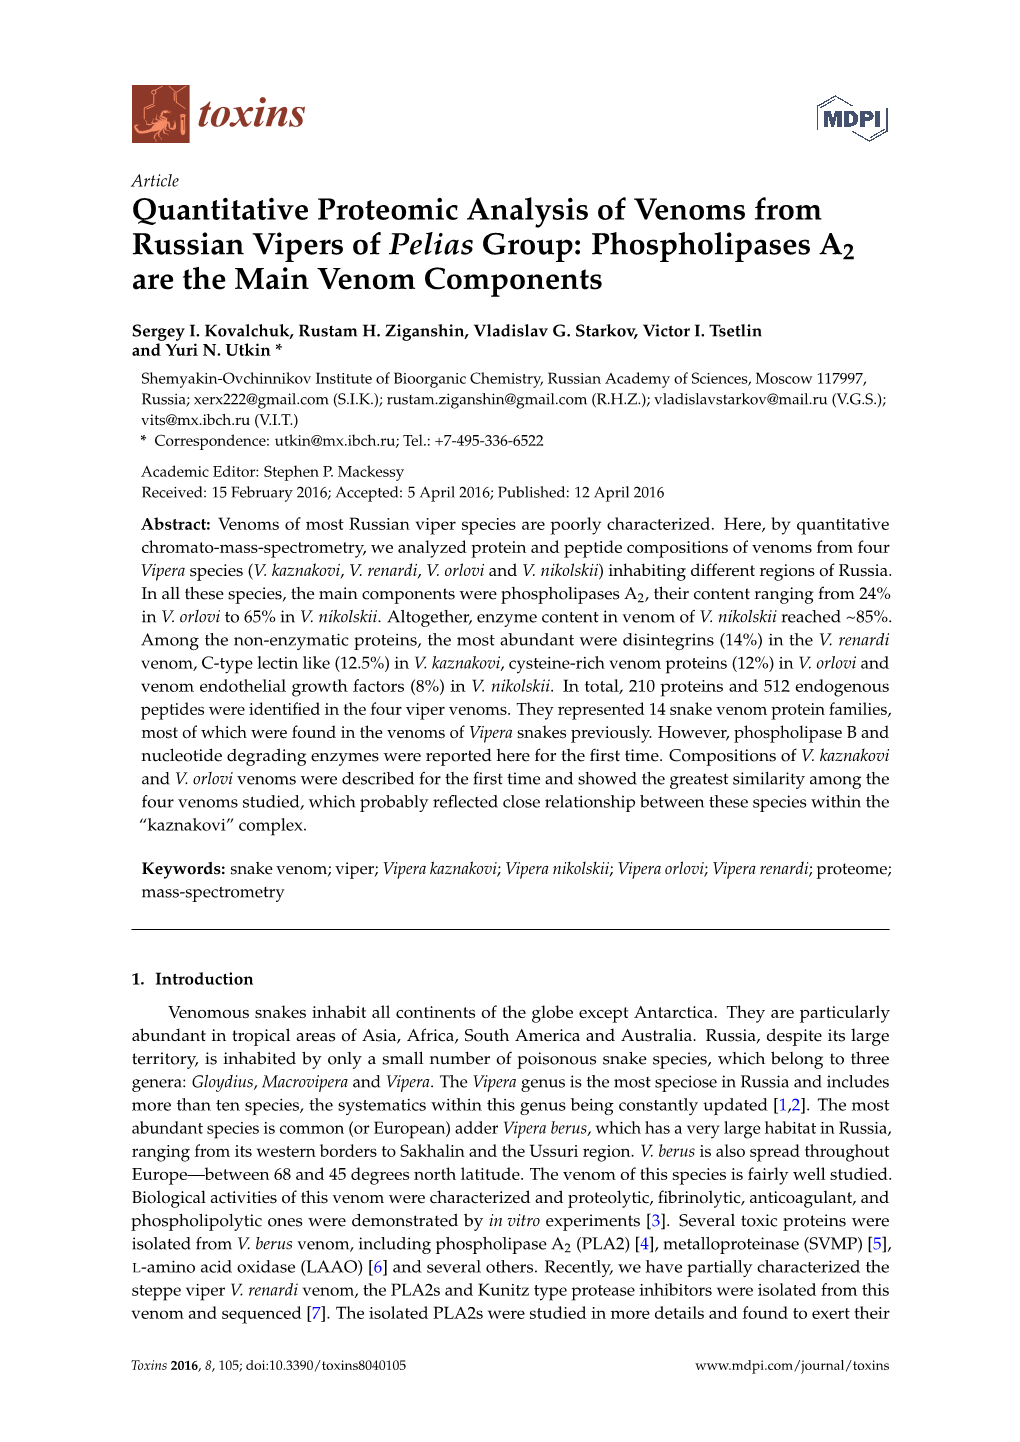 Quantitative Proteomic Analysis of Venoms from Russian Vipers of Pelias Group: Phospholipases A2 Are the Main Venom Components